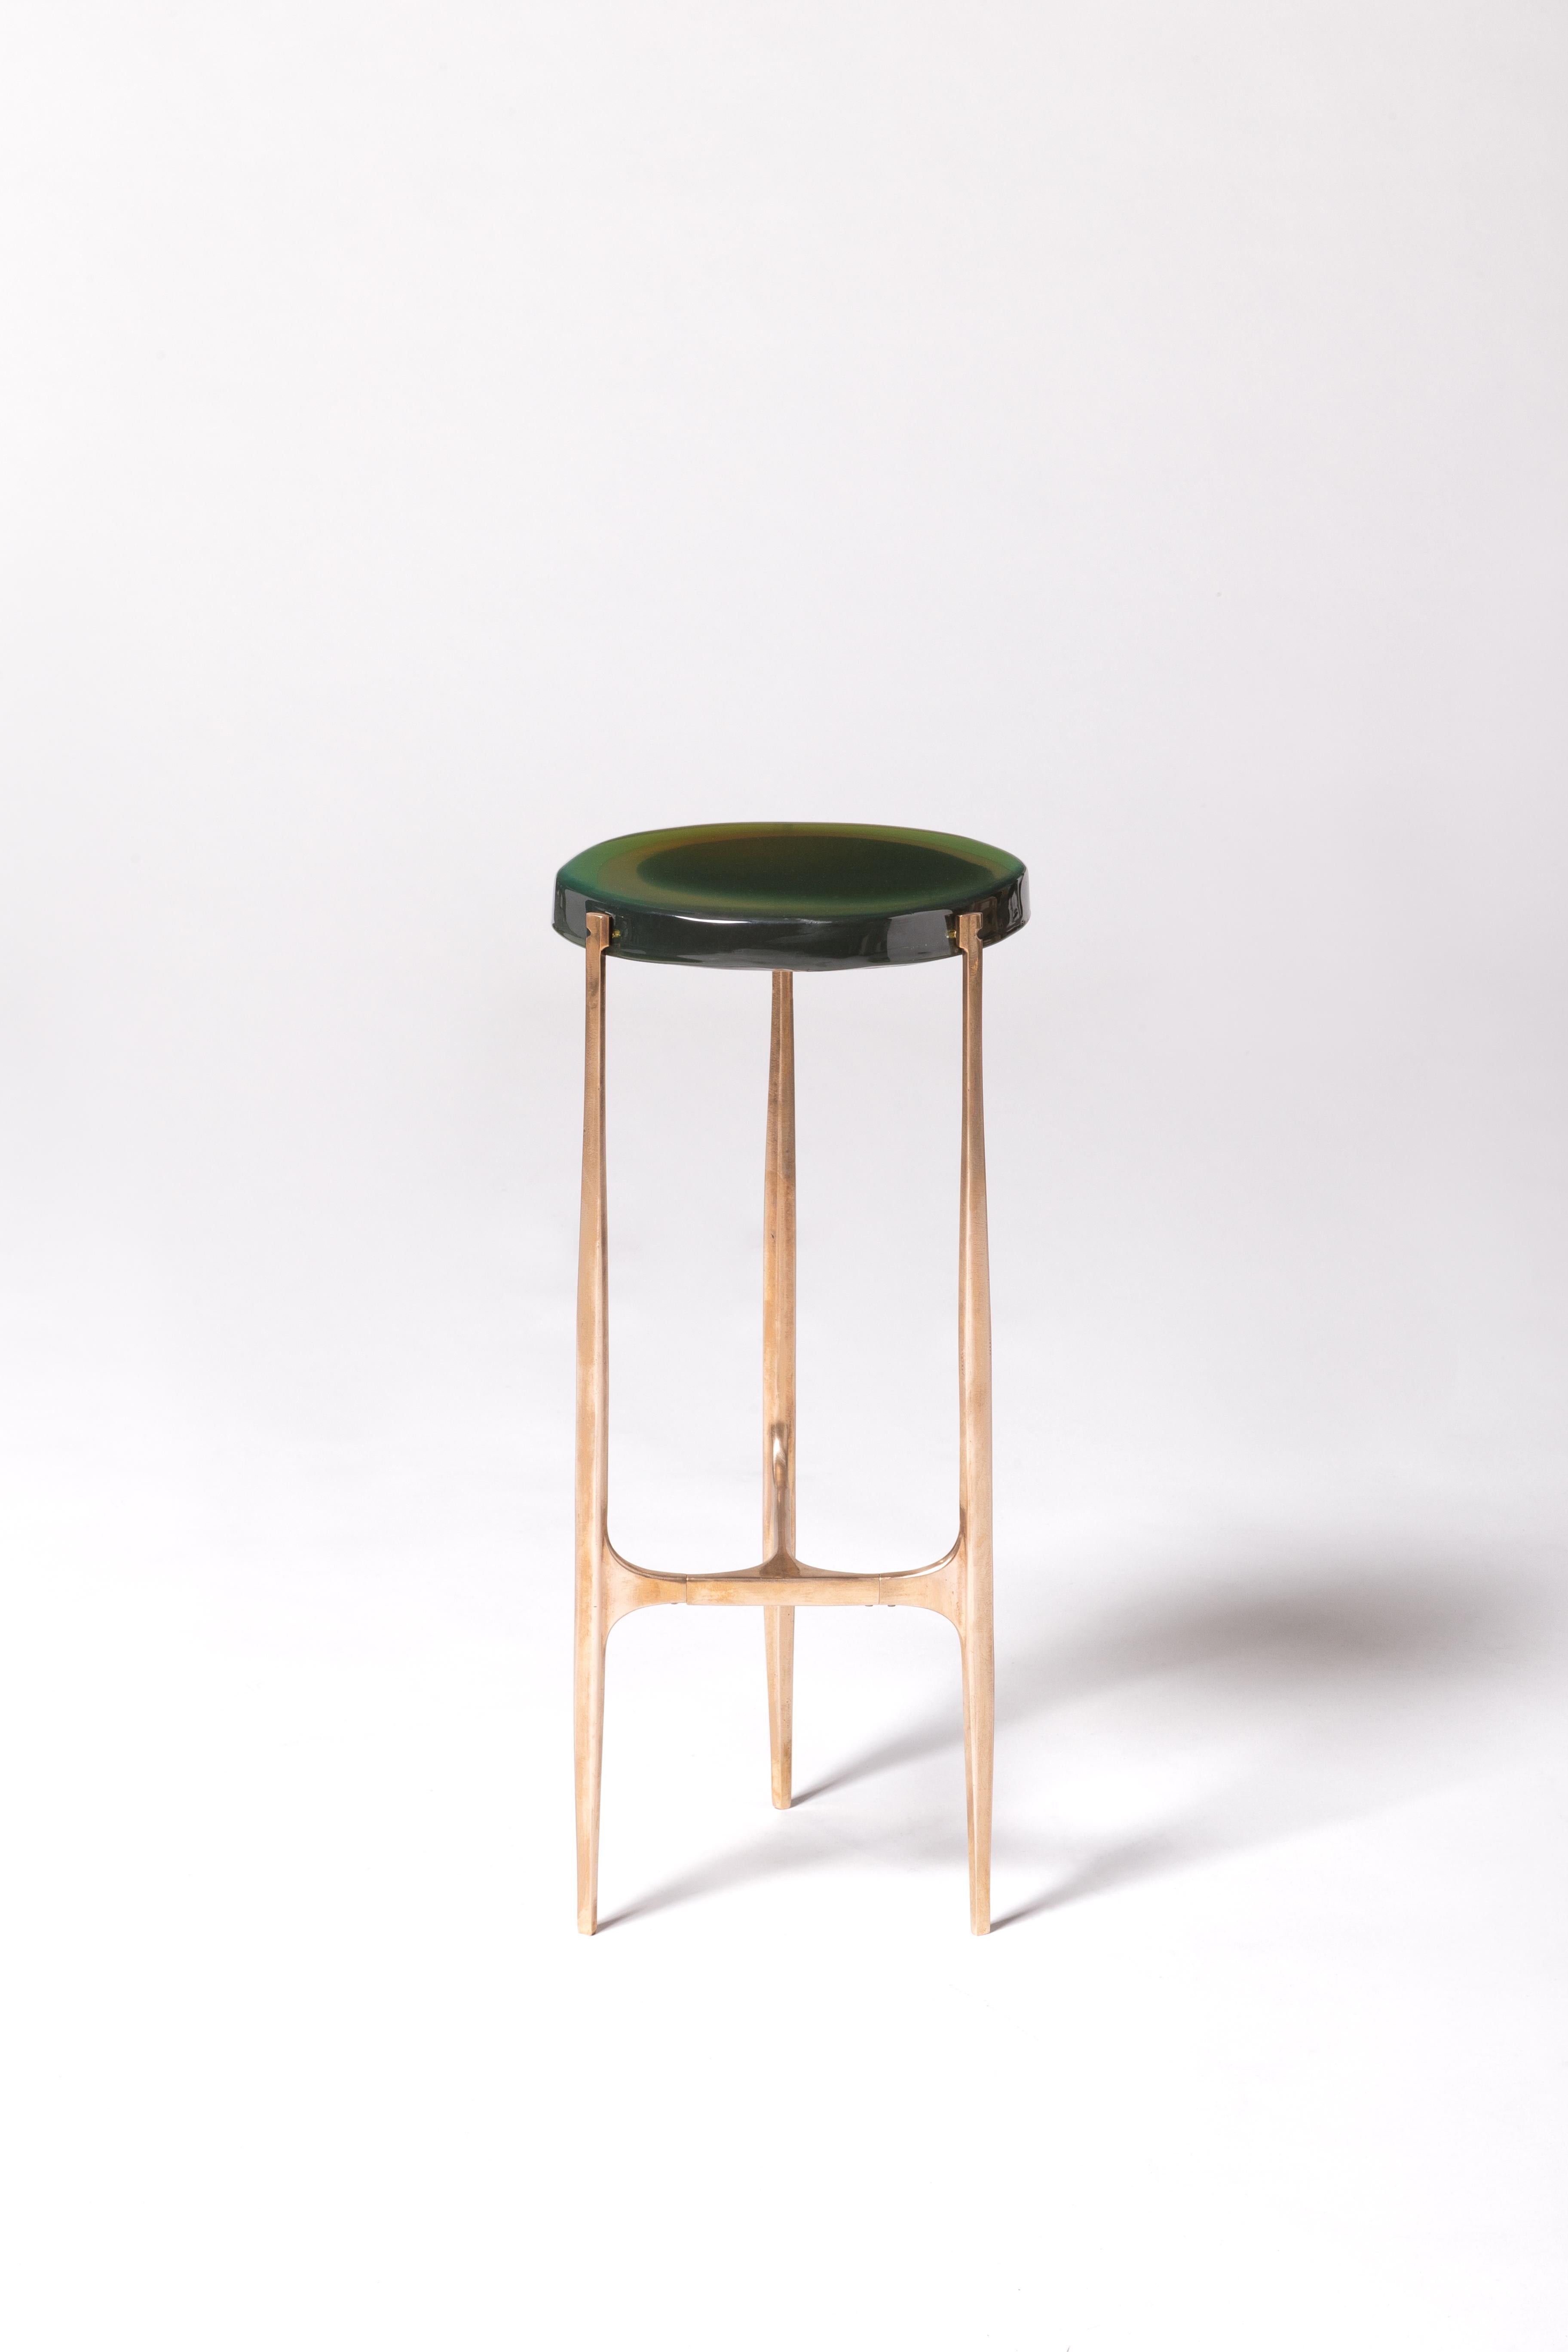 Agatha coffee table by Draga & Aurel
Dimensions: W 24 x D 24 x H 56
 top Ø 34 cm
Materials: Resin, bronze

The Agatha coffee tables are featured by irregular circular tops of transparent and
colorful resin sit on a bronze frame with a